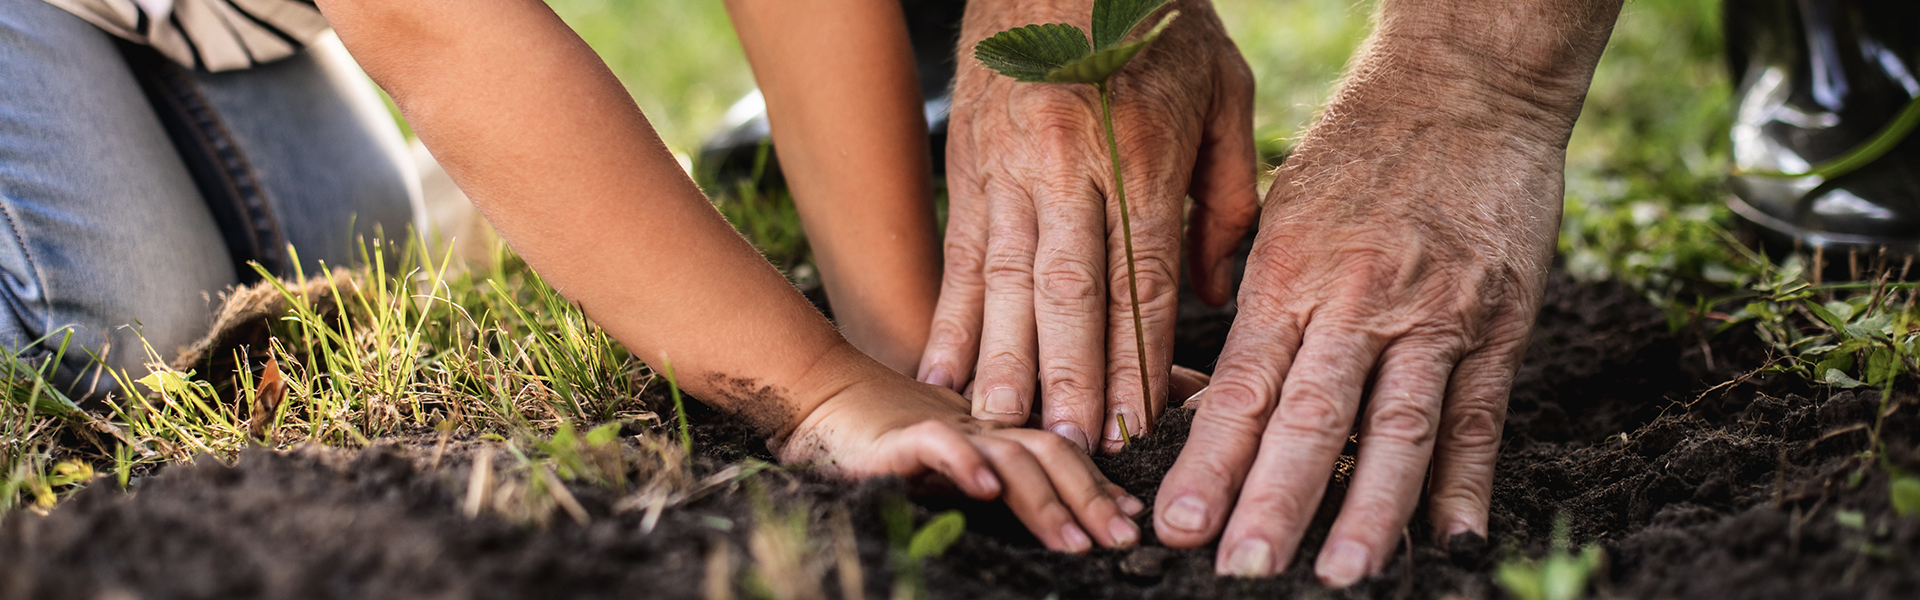 Young person hands and elderly person hands planting a tree together